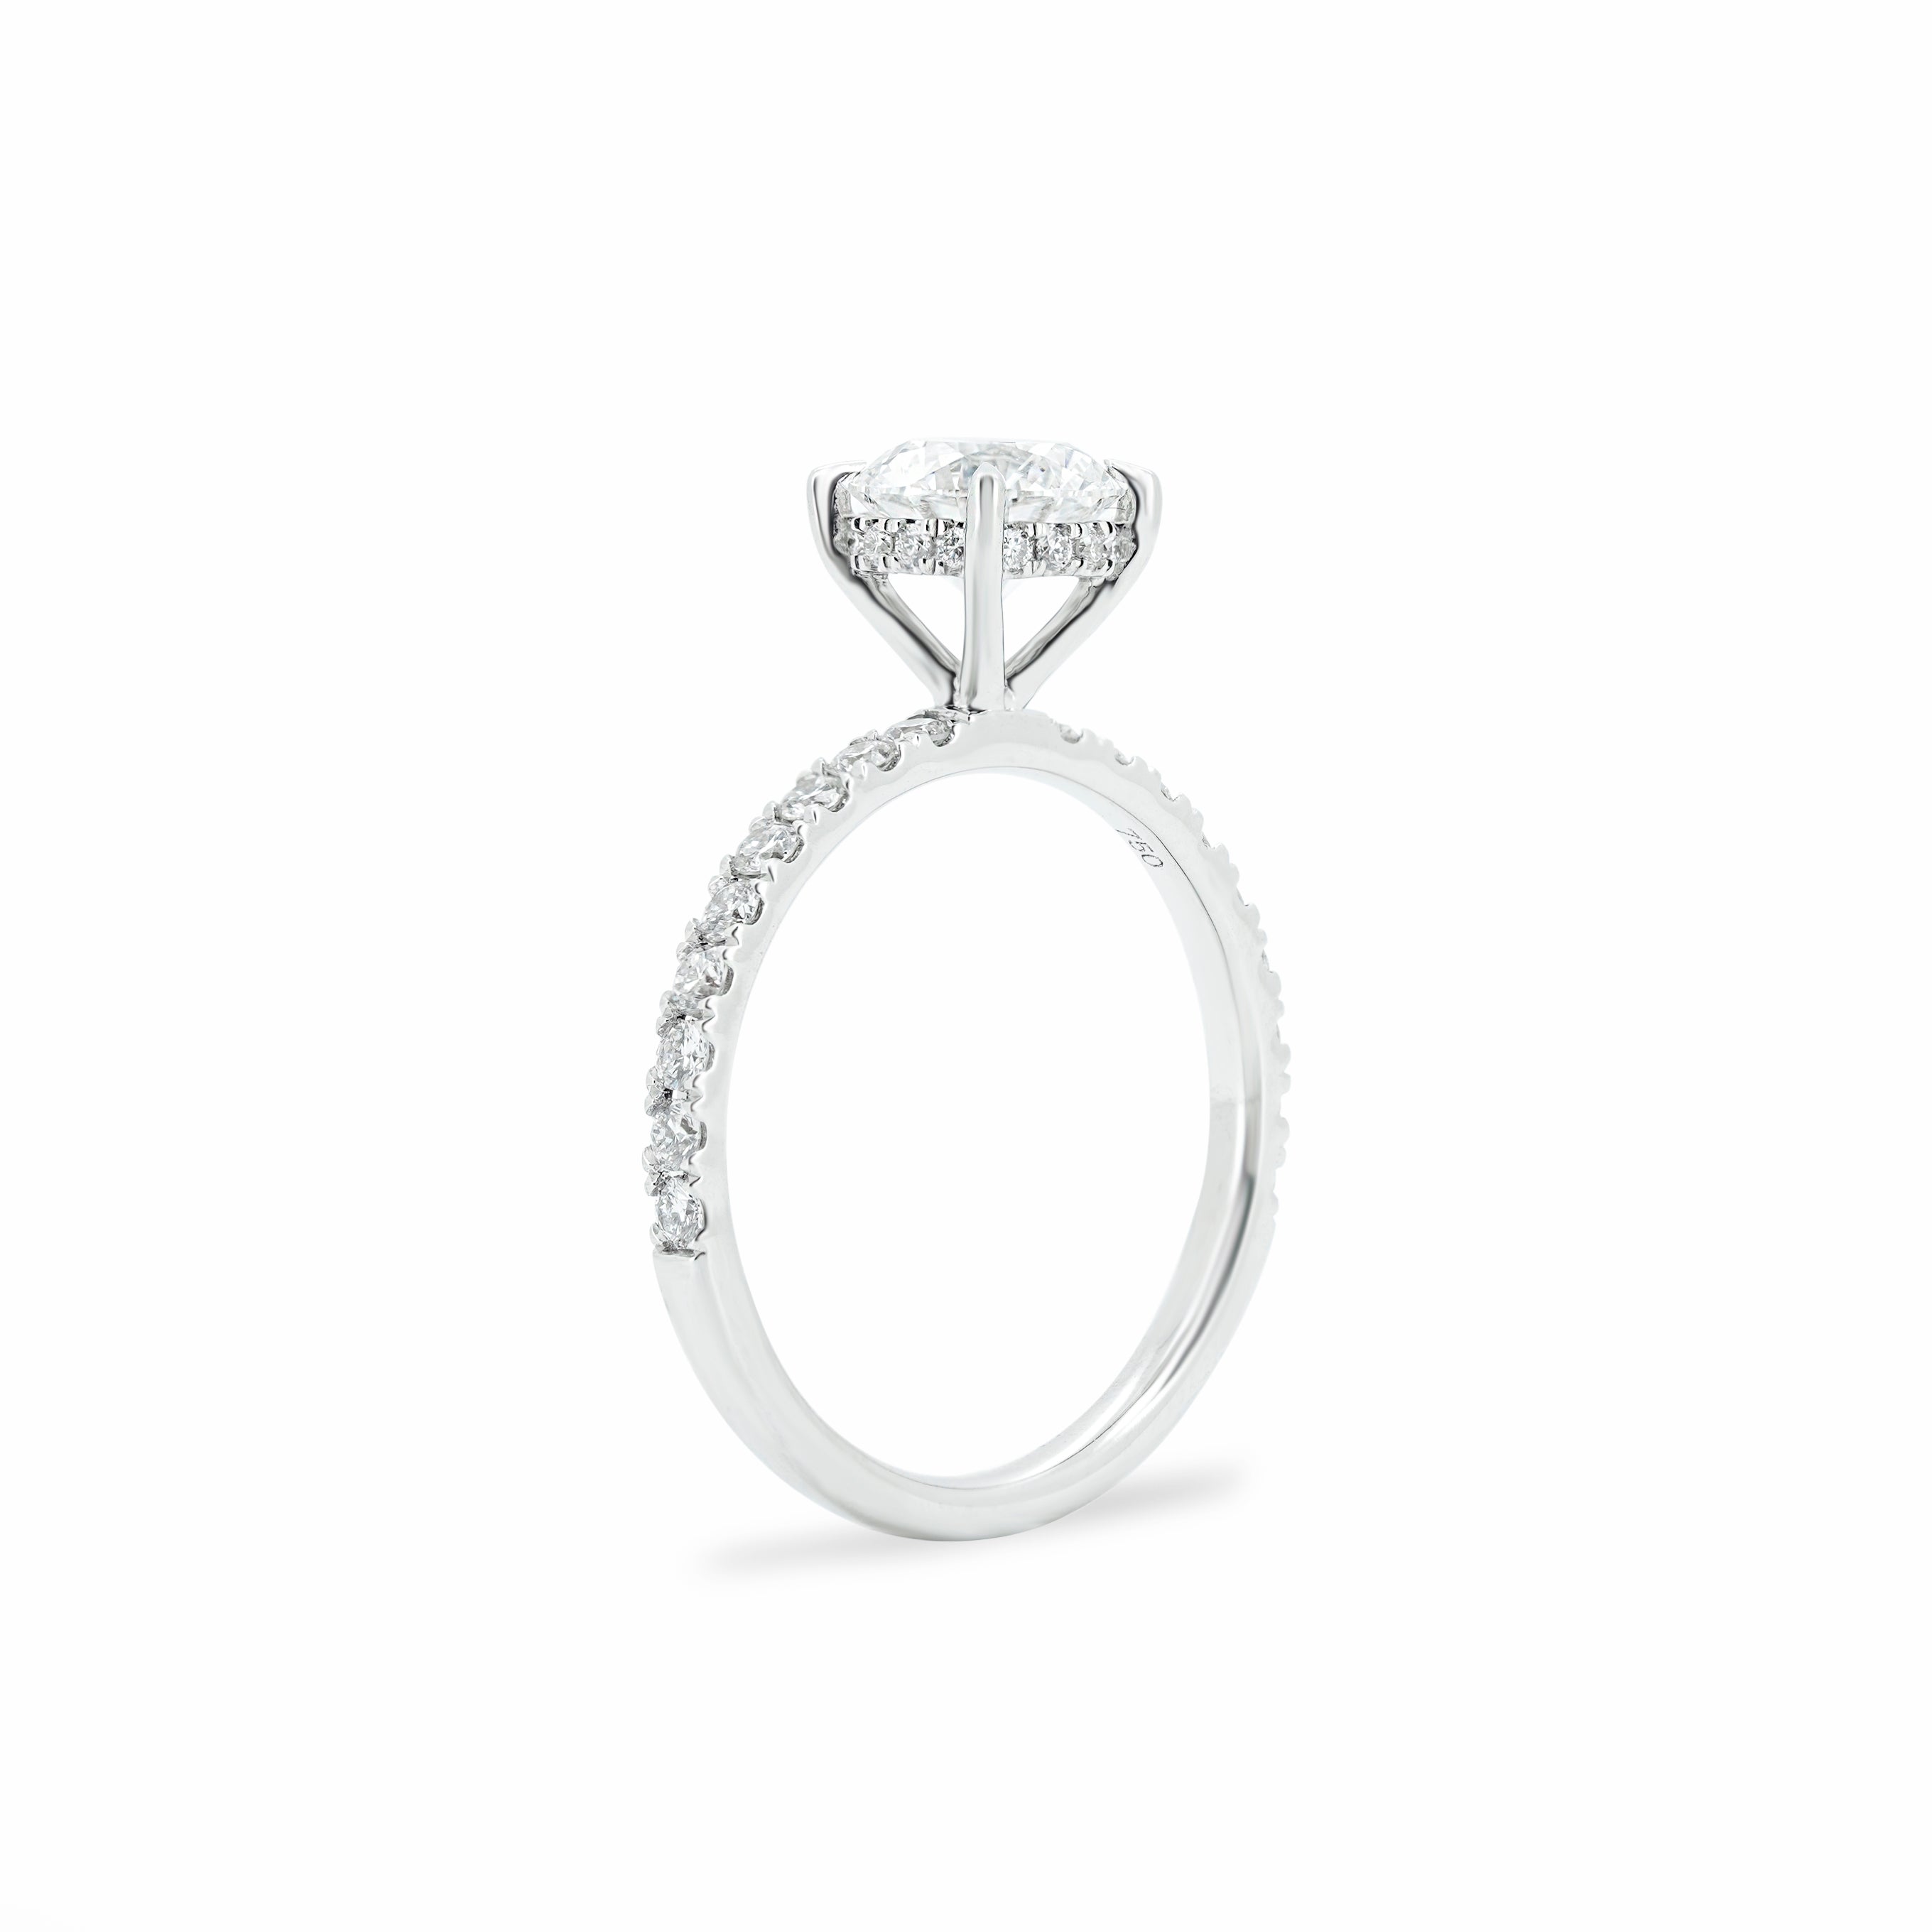 Round Diamond with Hidden Halo and Pave | Sol et Terre